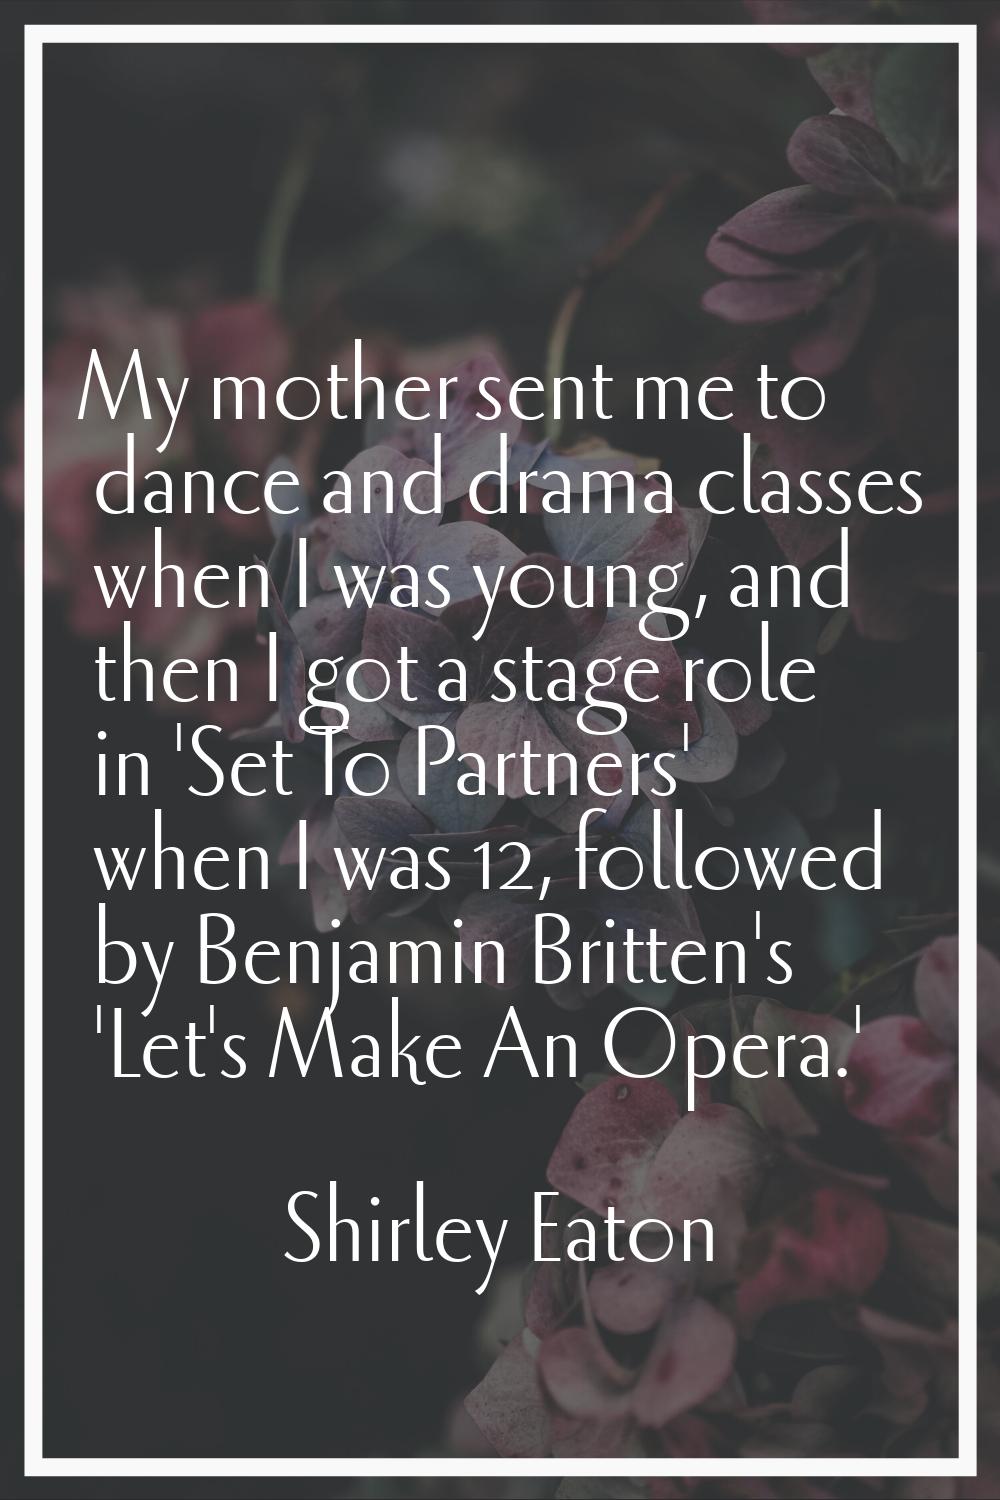 My mother sent me to dance and drama classes when I was young, and then I got a stage role in 'Set 